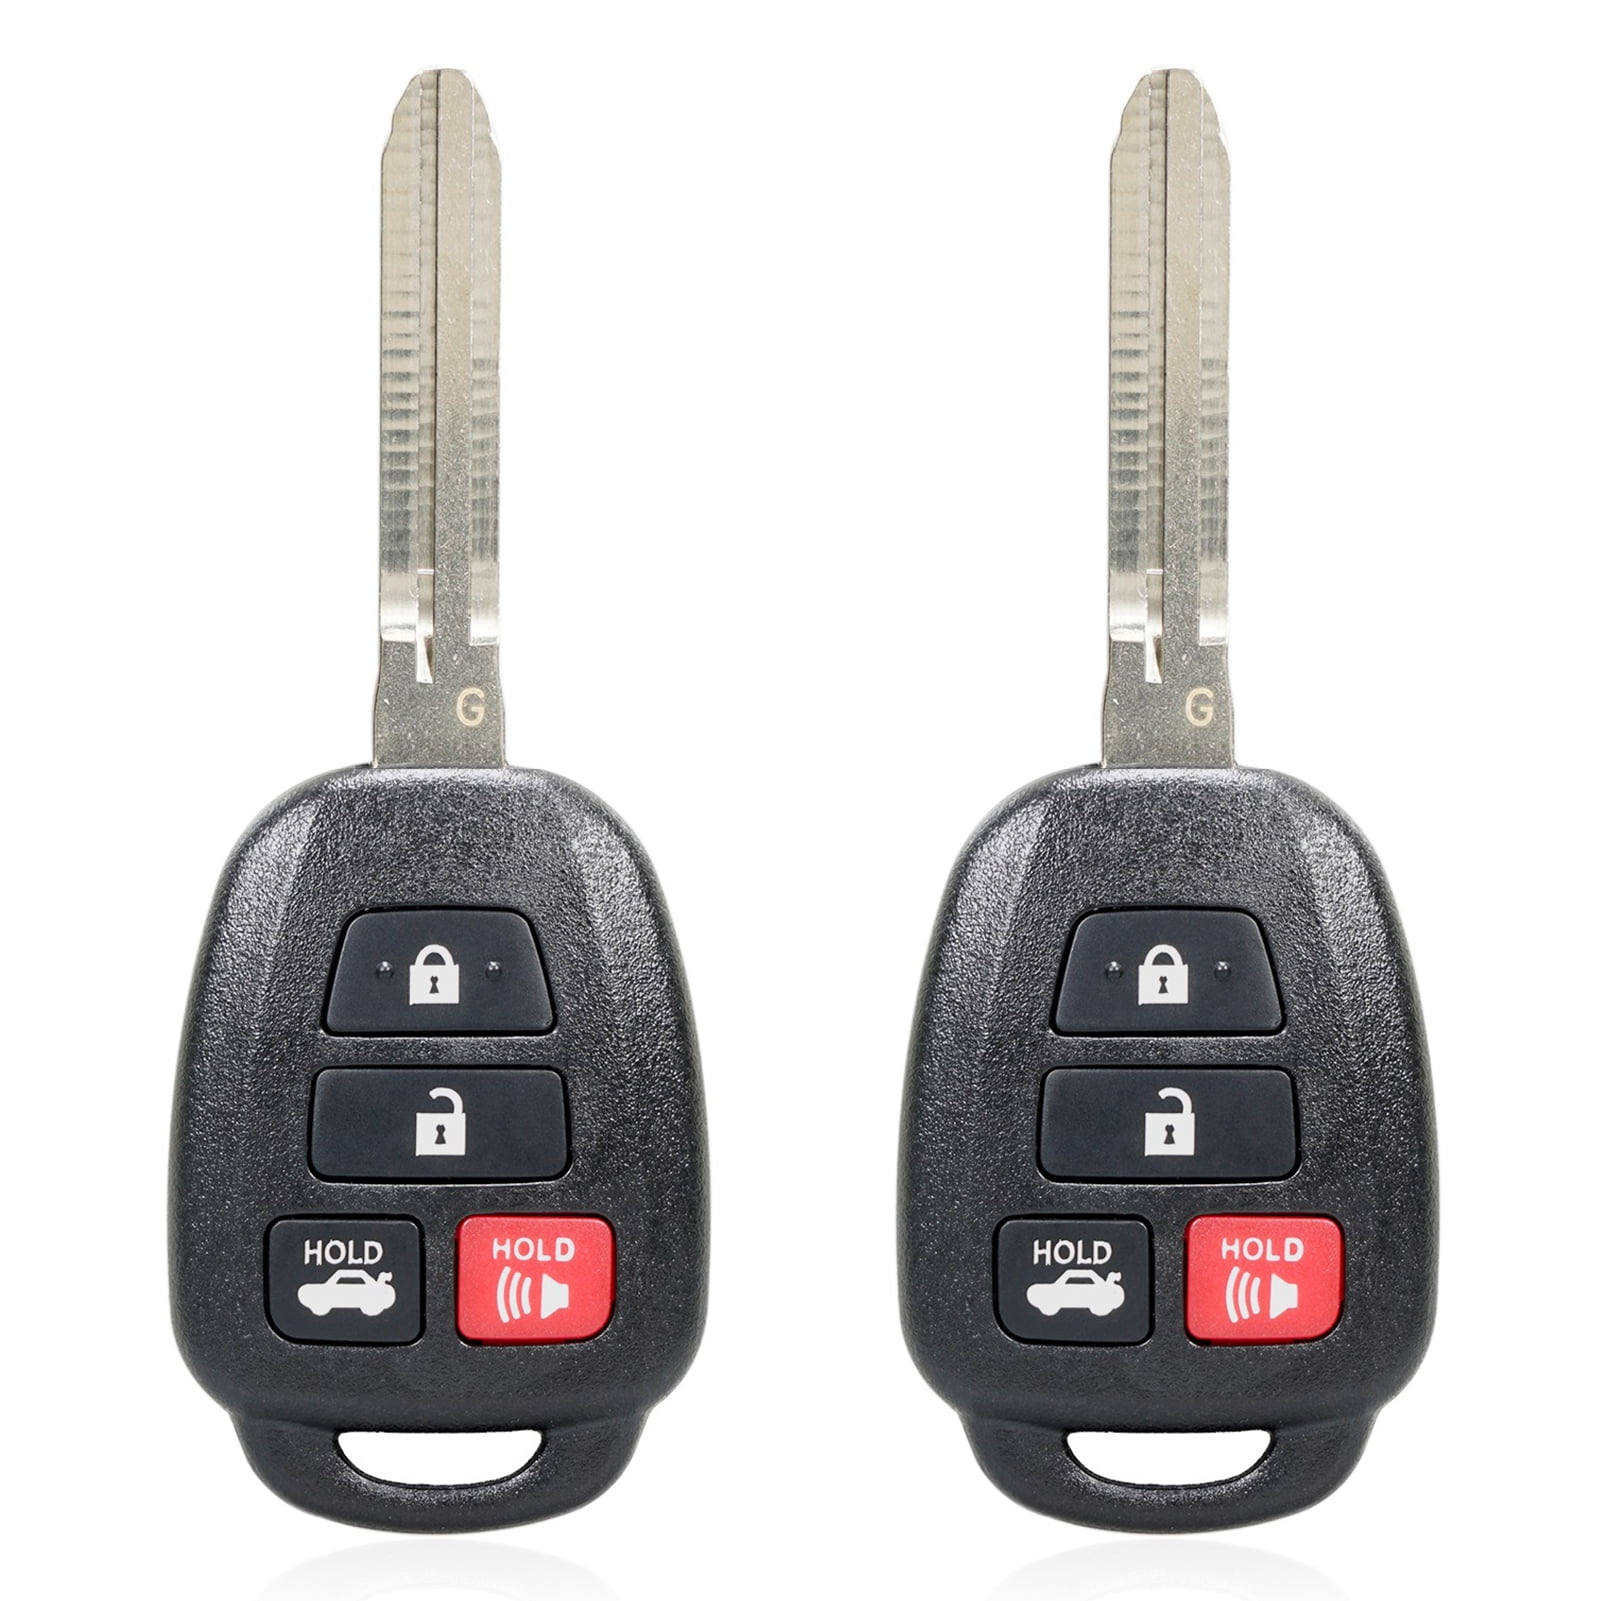 2 Replacement for 2012-2014 Toyota Camry Key Fob Keyless Entry Car Remote 